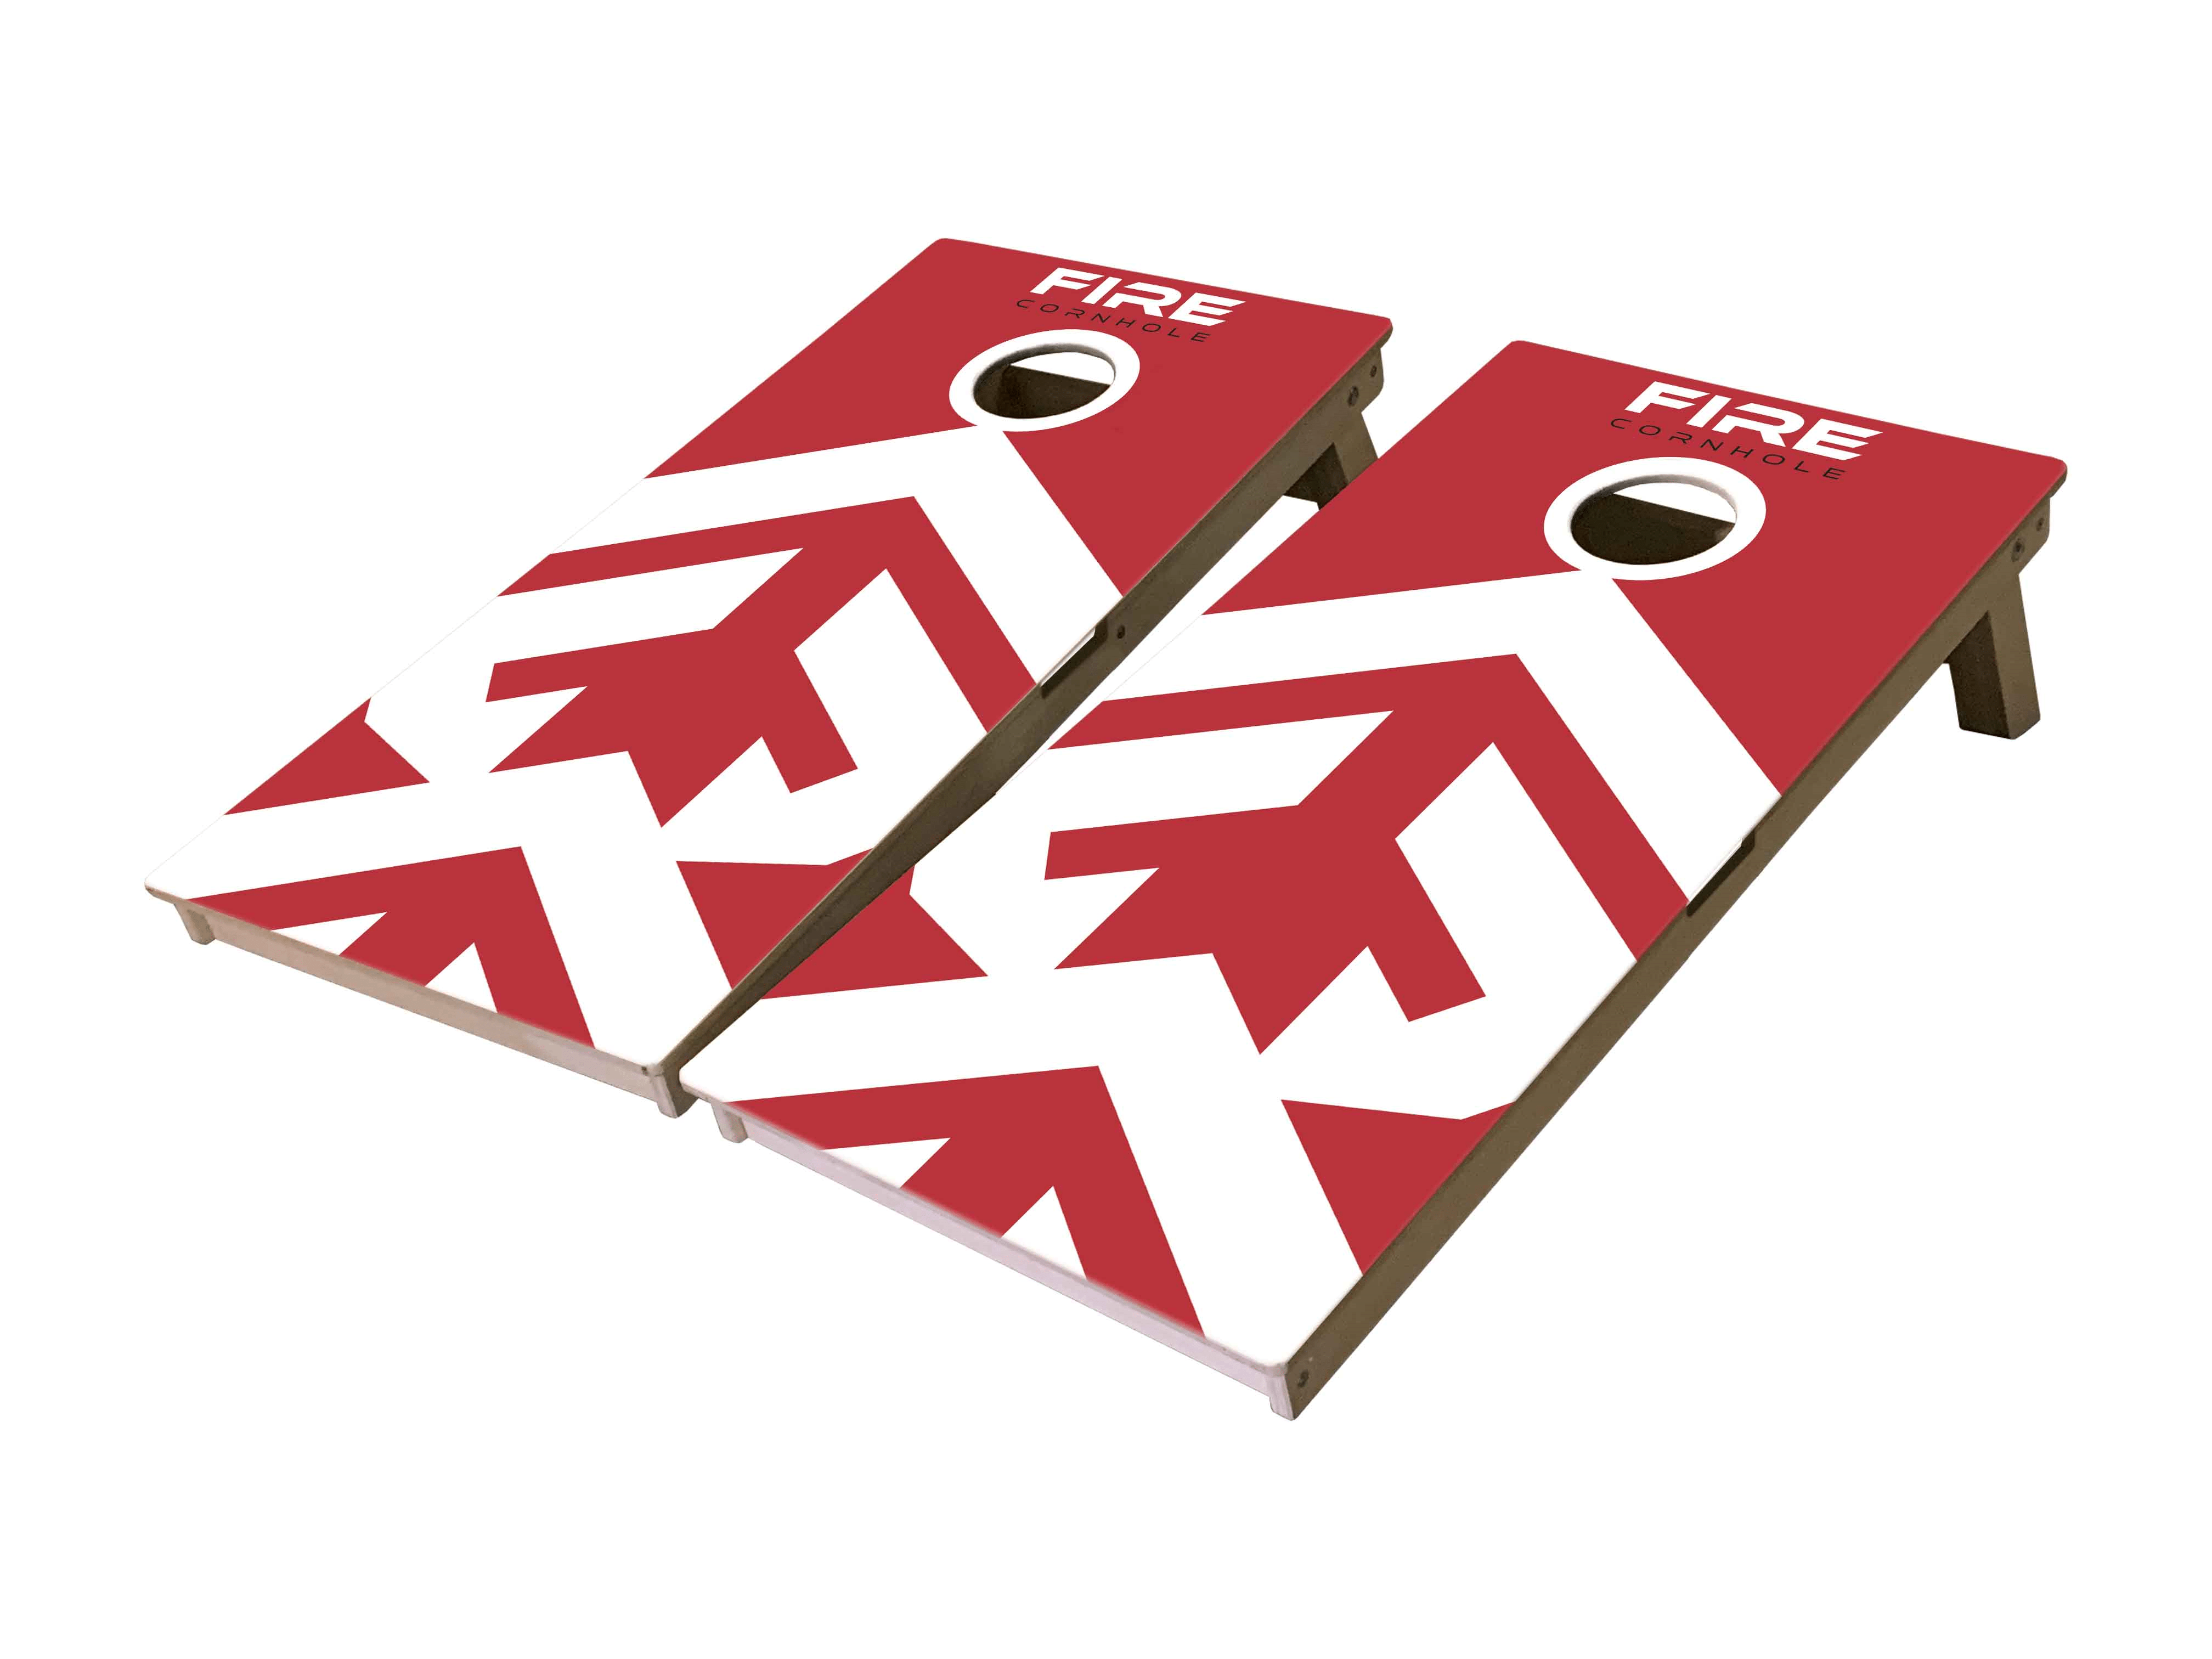 Fire Cornhole boards in red and white